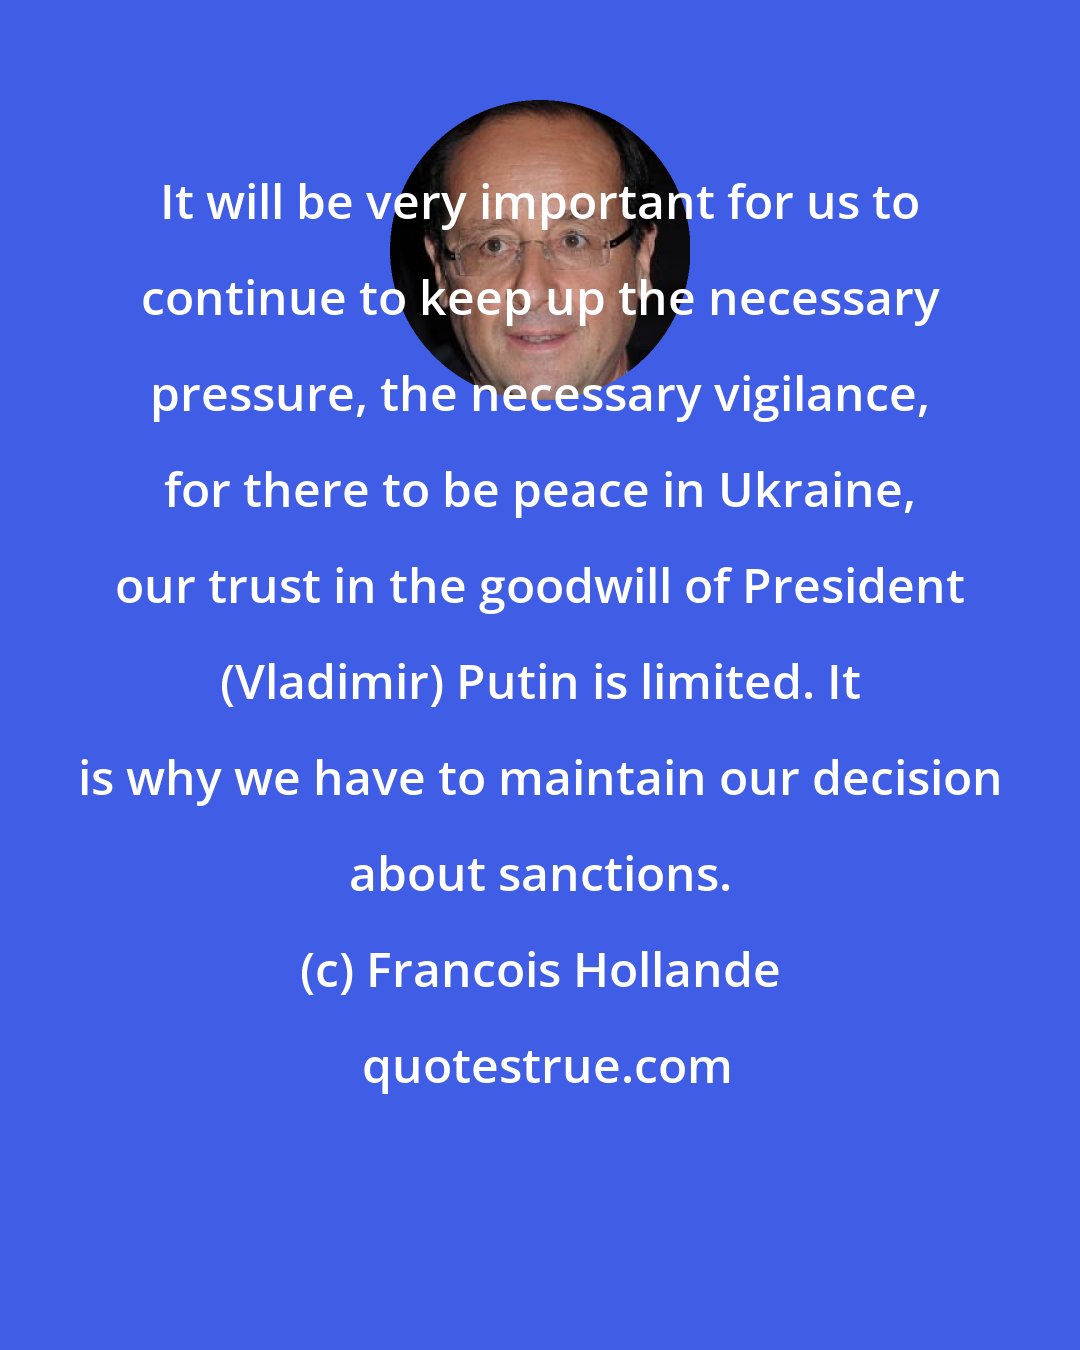 Francois Hollande: It will be very important for us to continue to keep up the necessary pressure, the necessary vigilance, for there to be peace in Ukraine, our trust in the goodwill of President (Vladimir) Putin is limited. It is why we have to maintain our decision about sanctions.